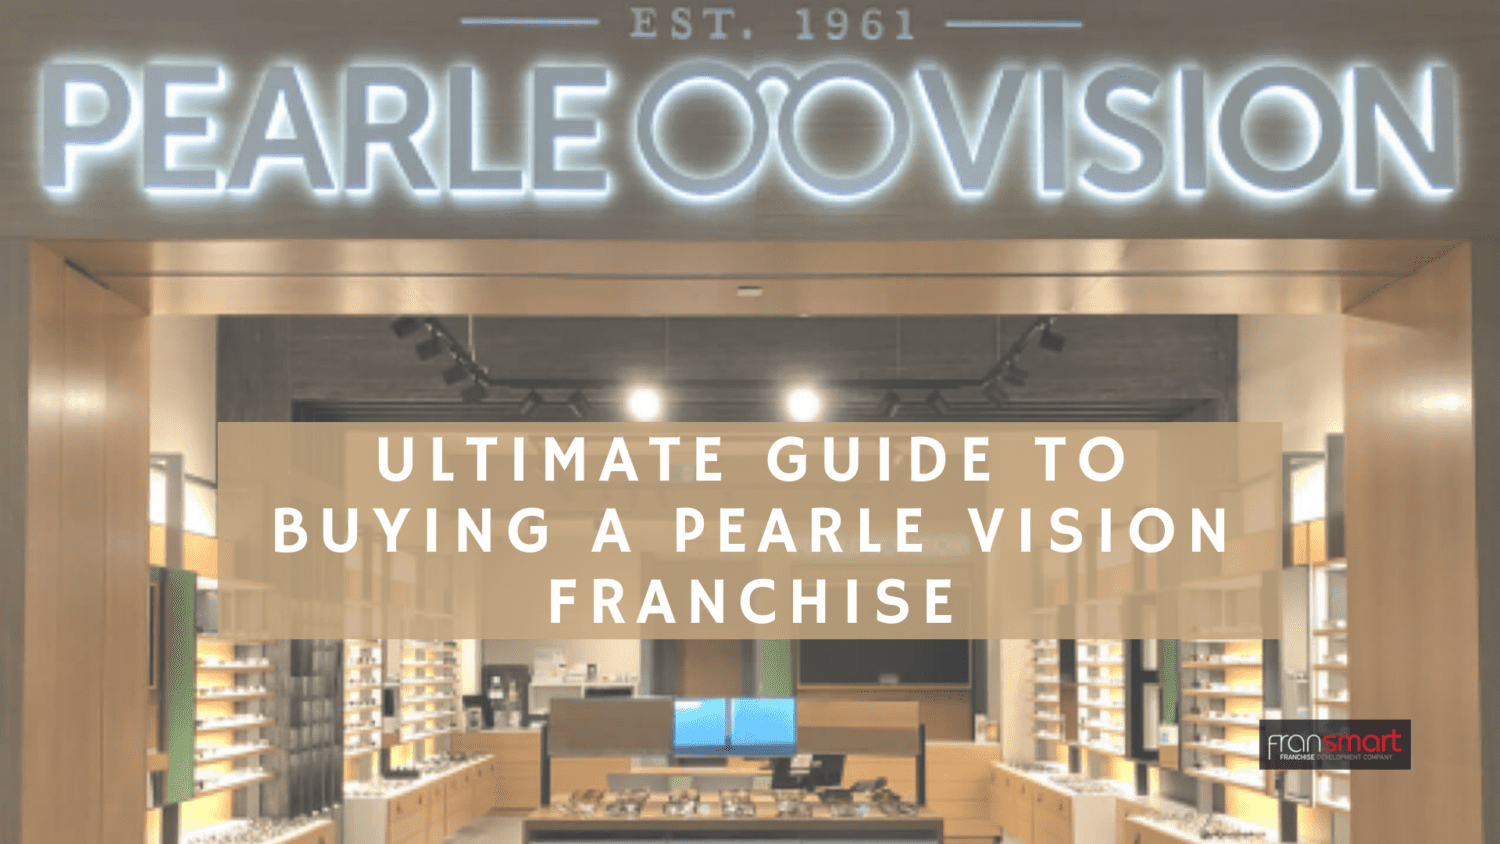 Ultimate Guide to Buying a Pearle Vision Franchise